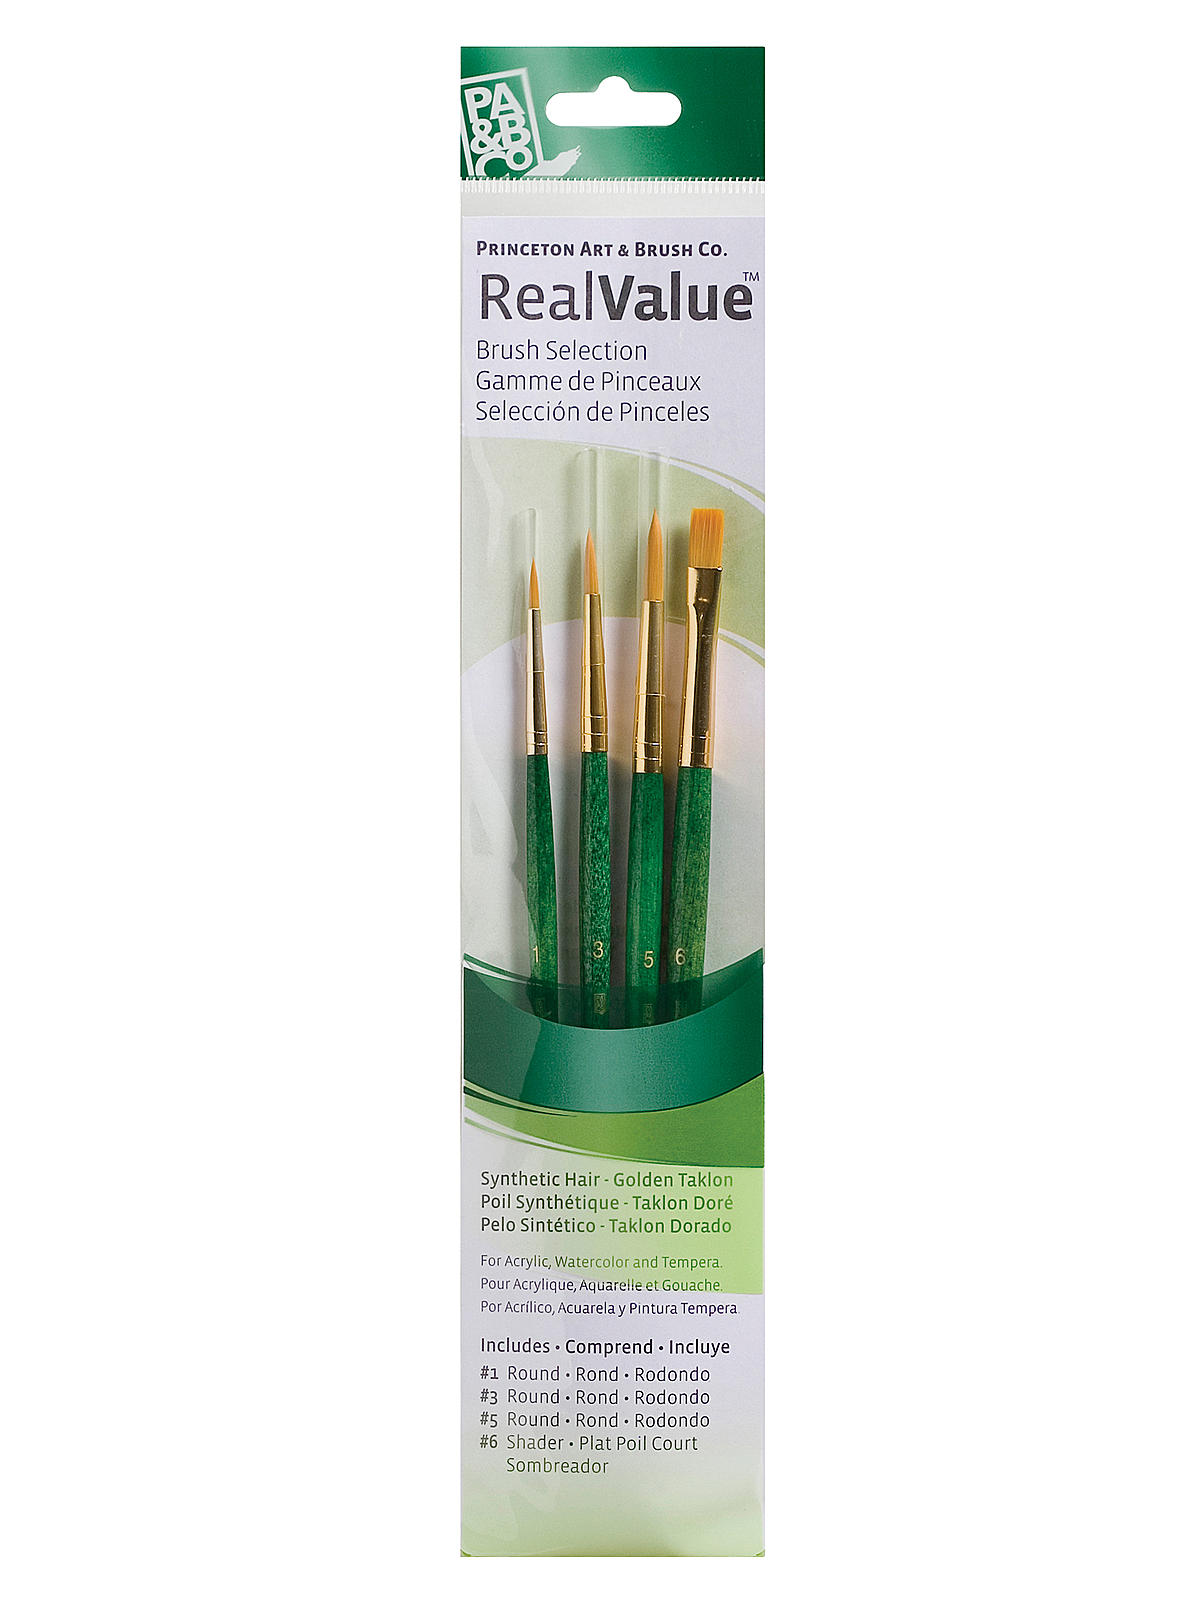 Real Value Series 9000 Green Handled Brush Sets 9115 Set Of 4